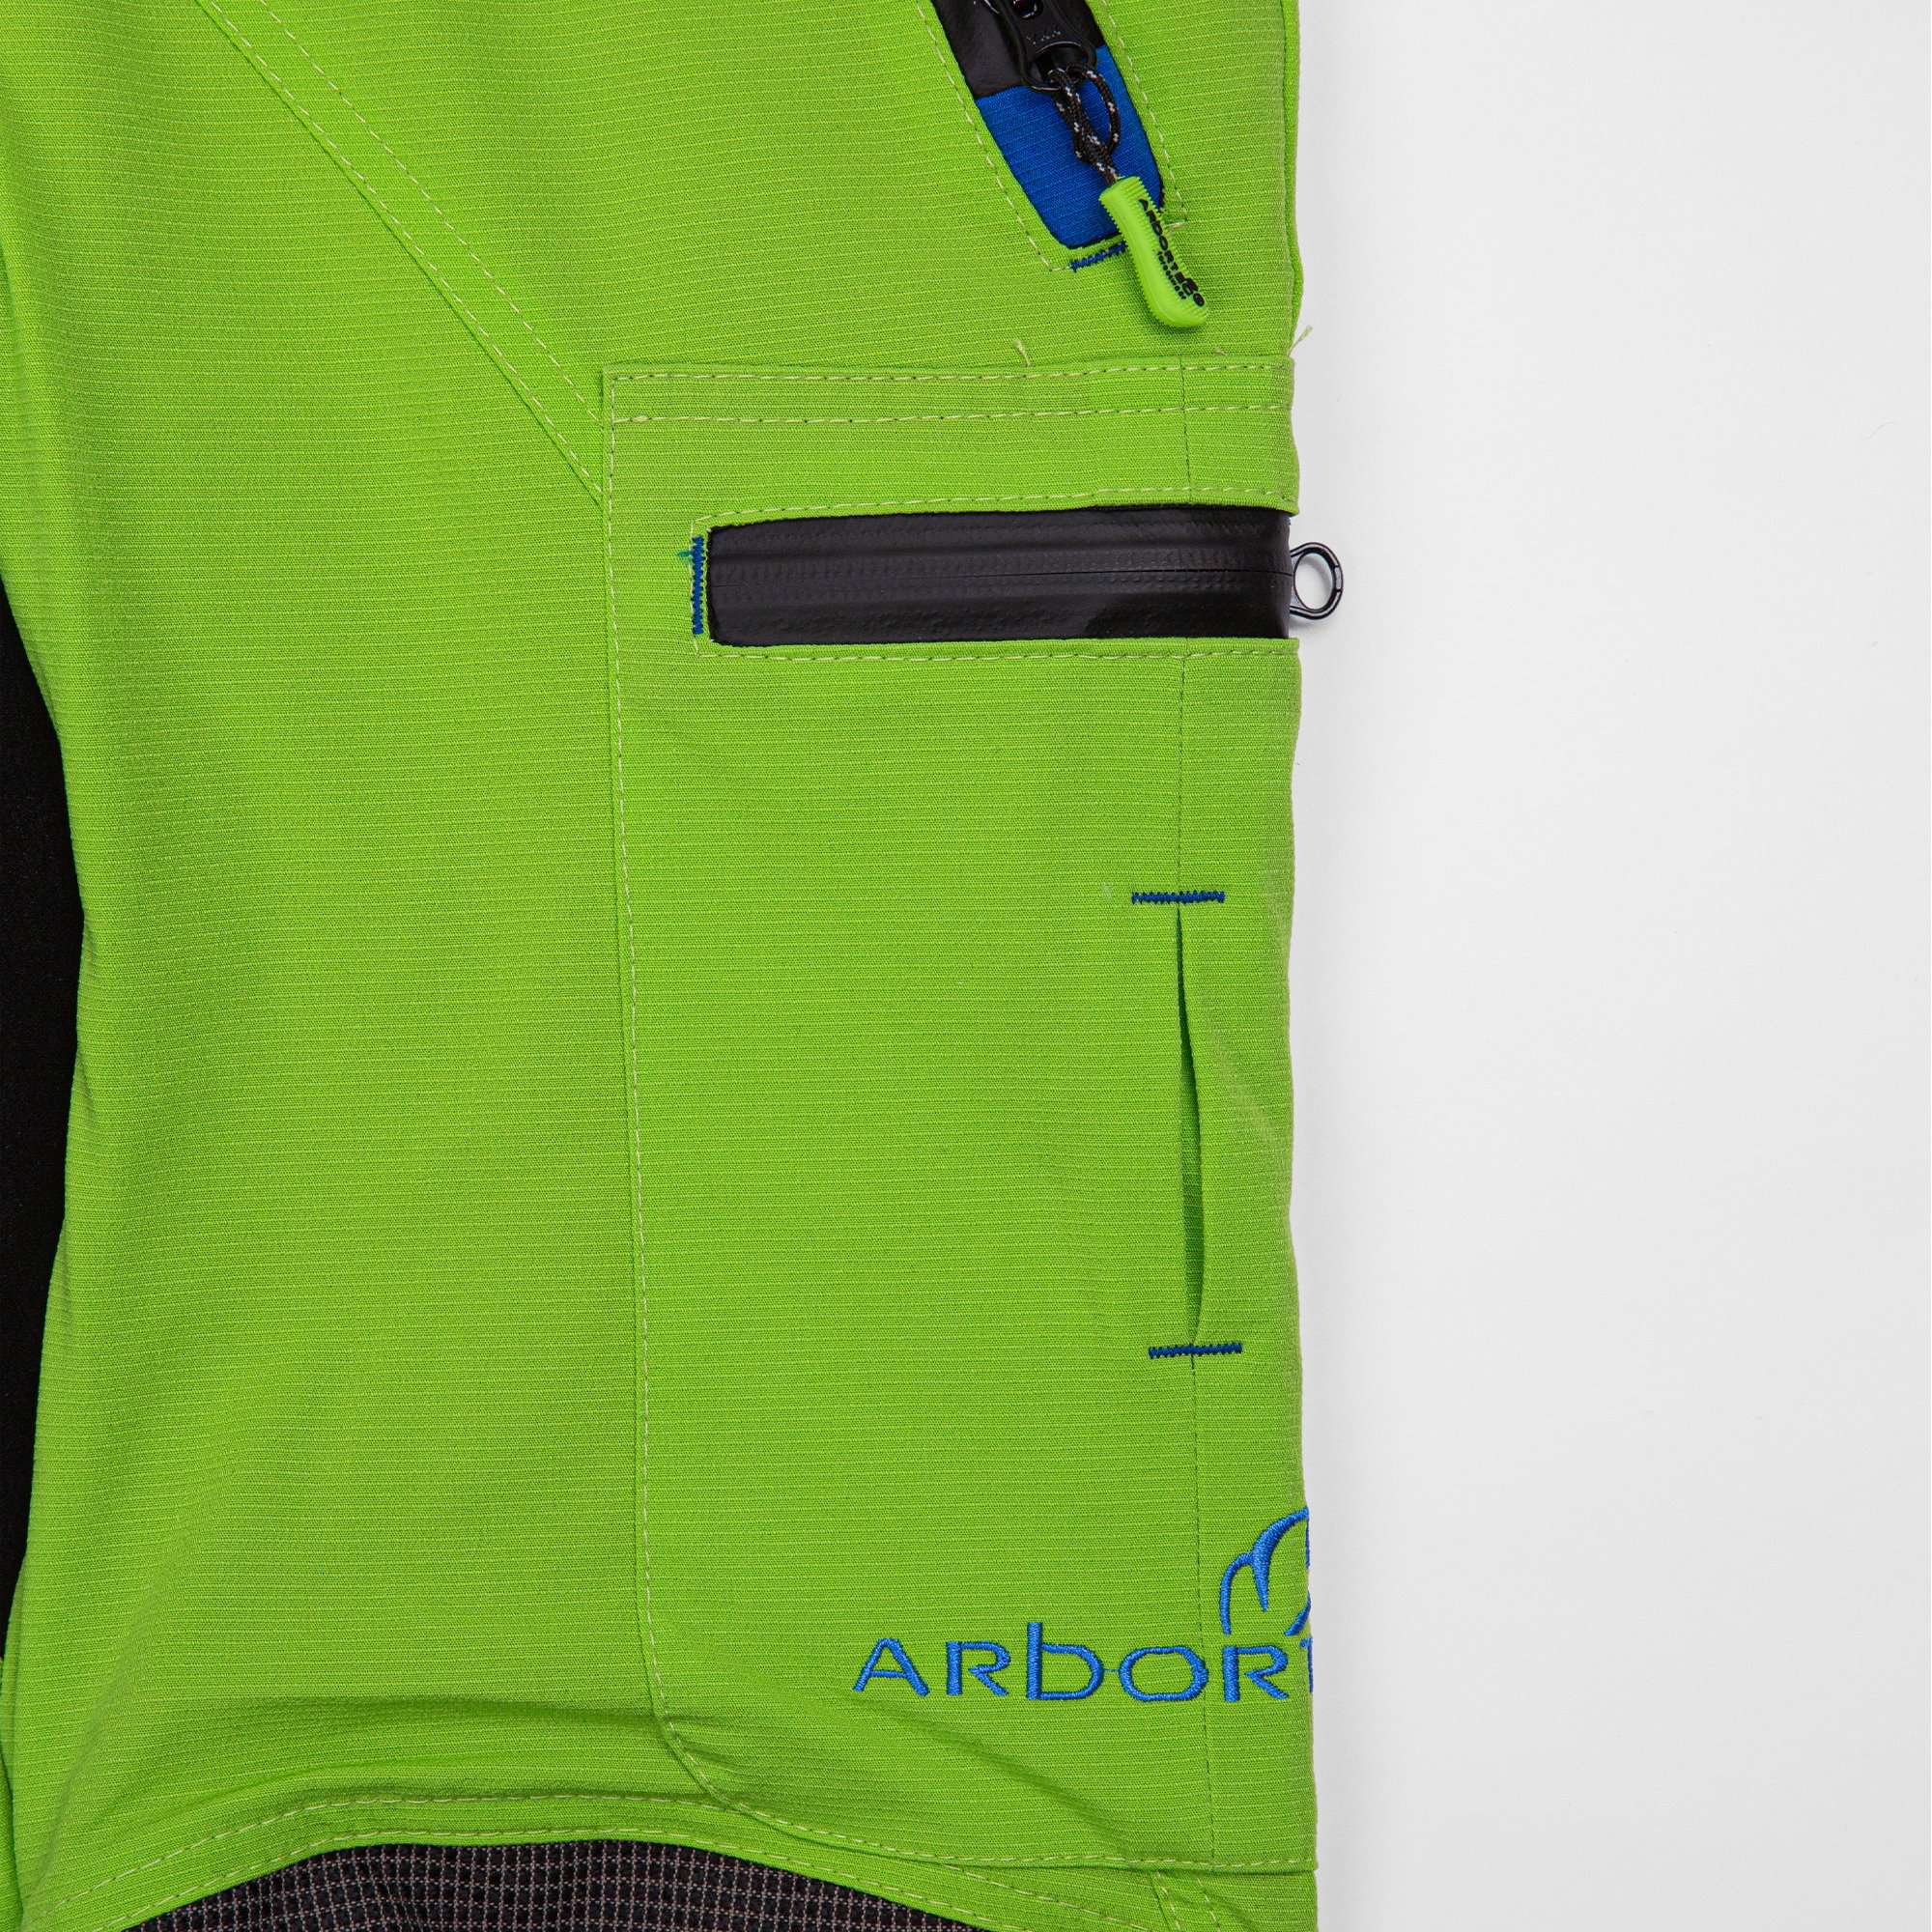 AT4070 Breatheflex Pro Type C Class 1 Chainsaw Trousers - Lime - Arbortec Forestwear